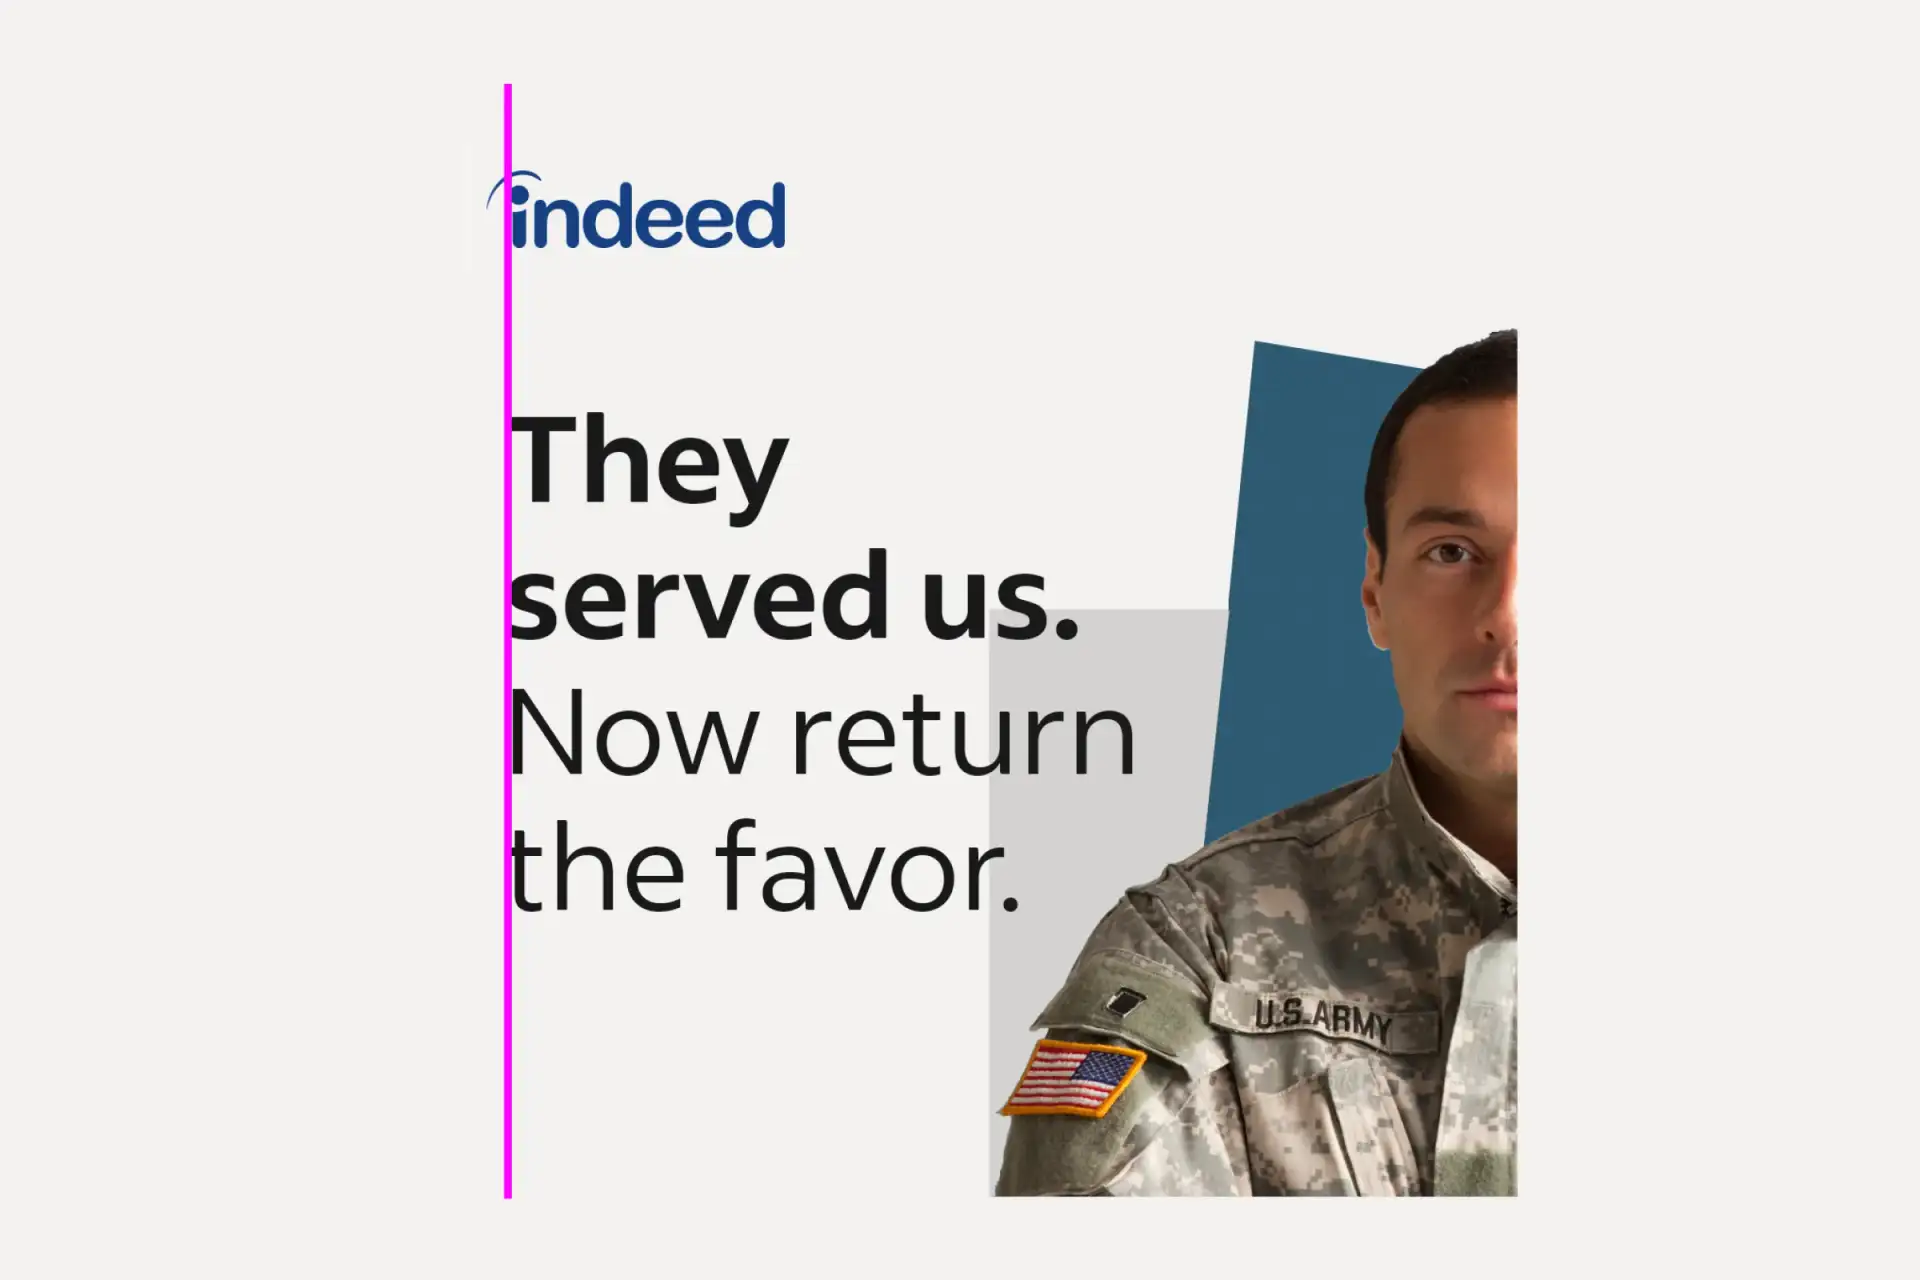 A vertical pink line aligns the left edge of the “i” in the Indeed logo with the left edge of text below it